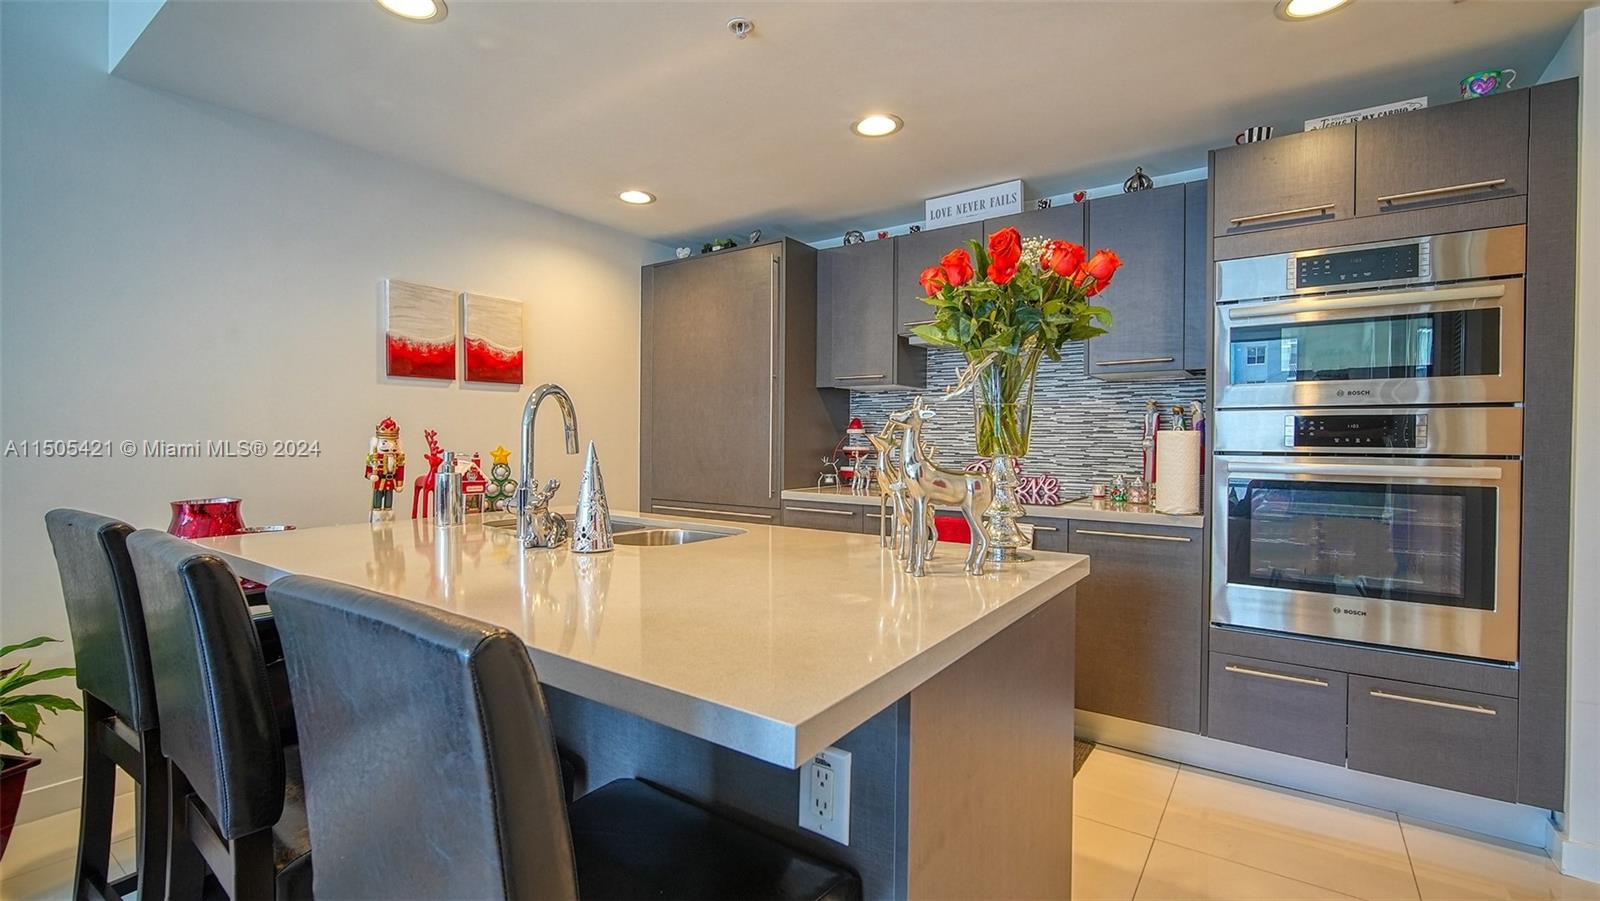 a room with stainless steel appliances kitchen island granite countertop a dining table and chairs with wooden floor